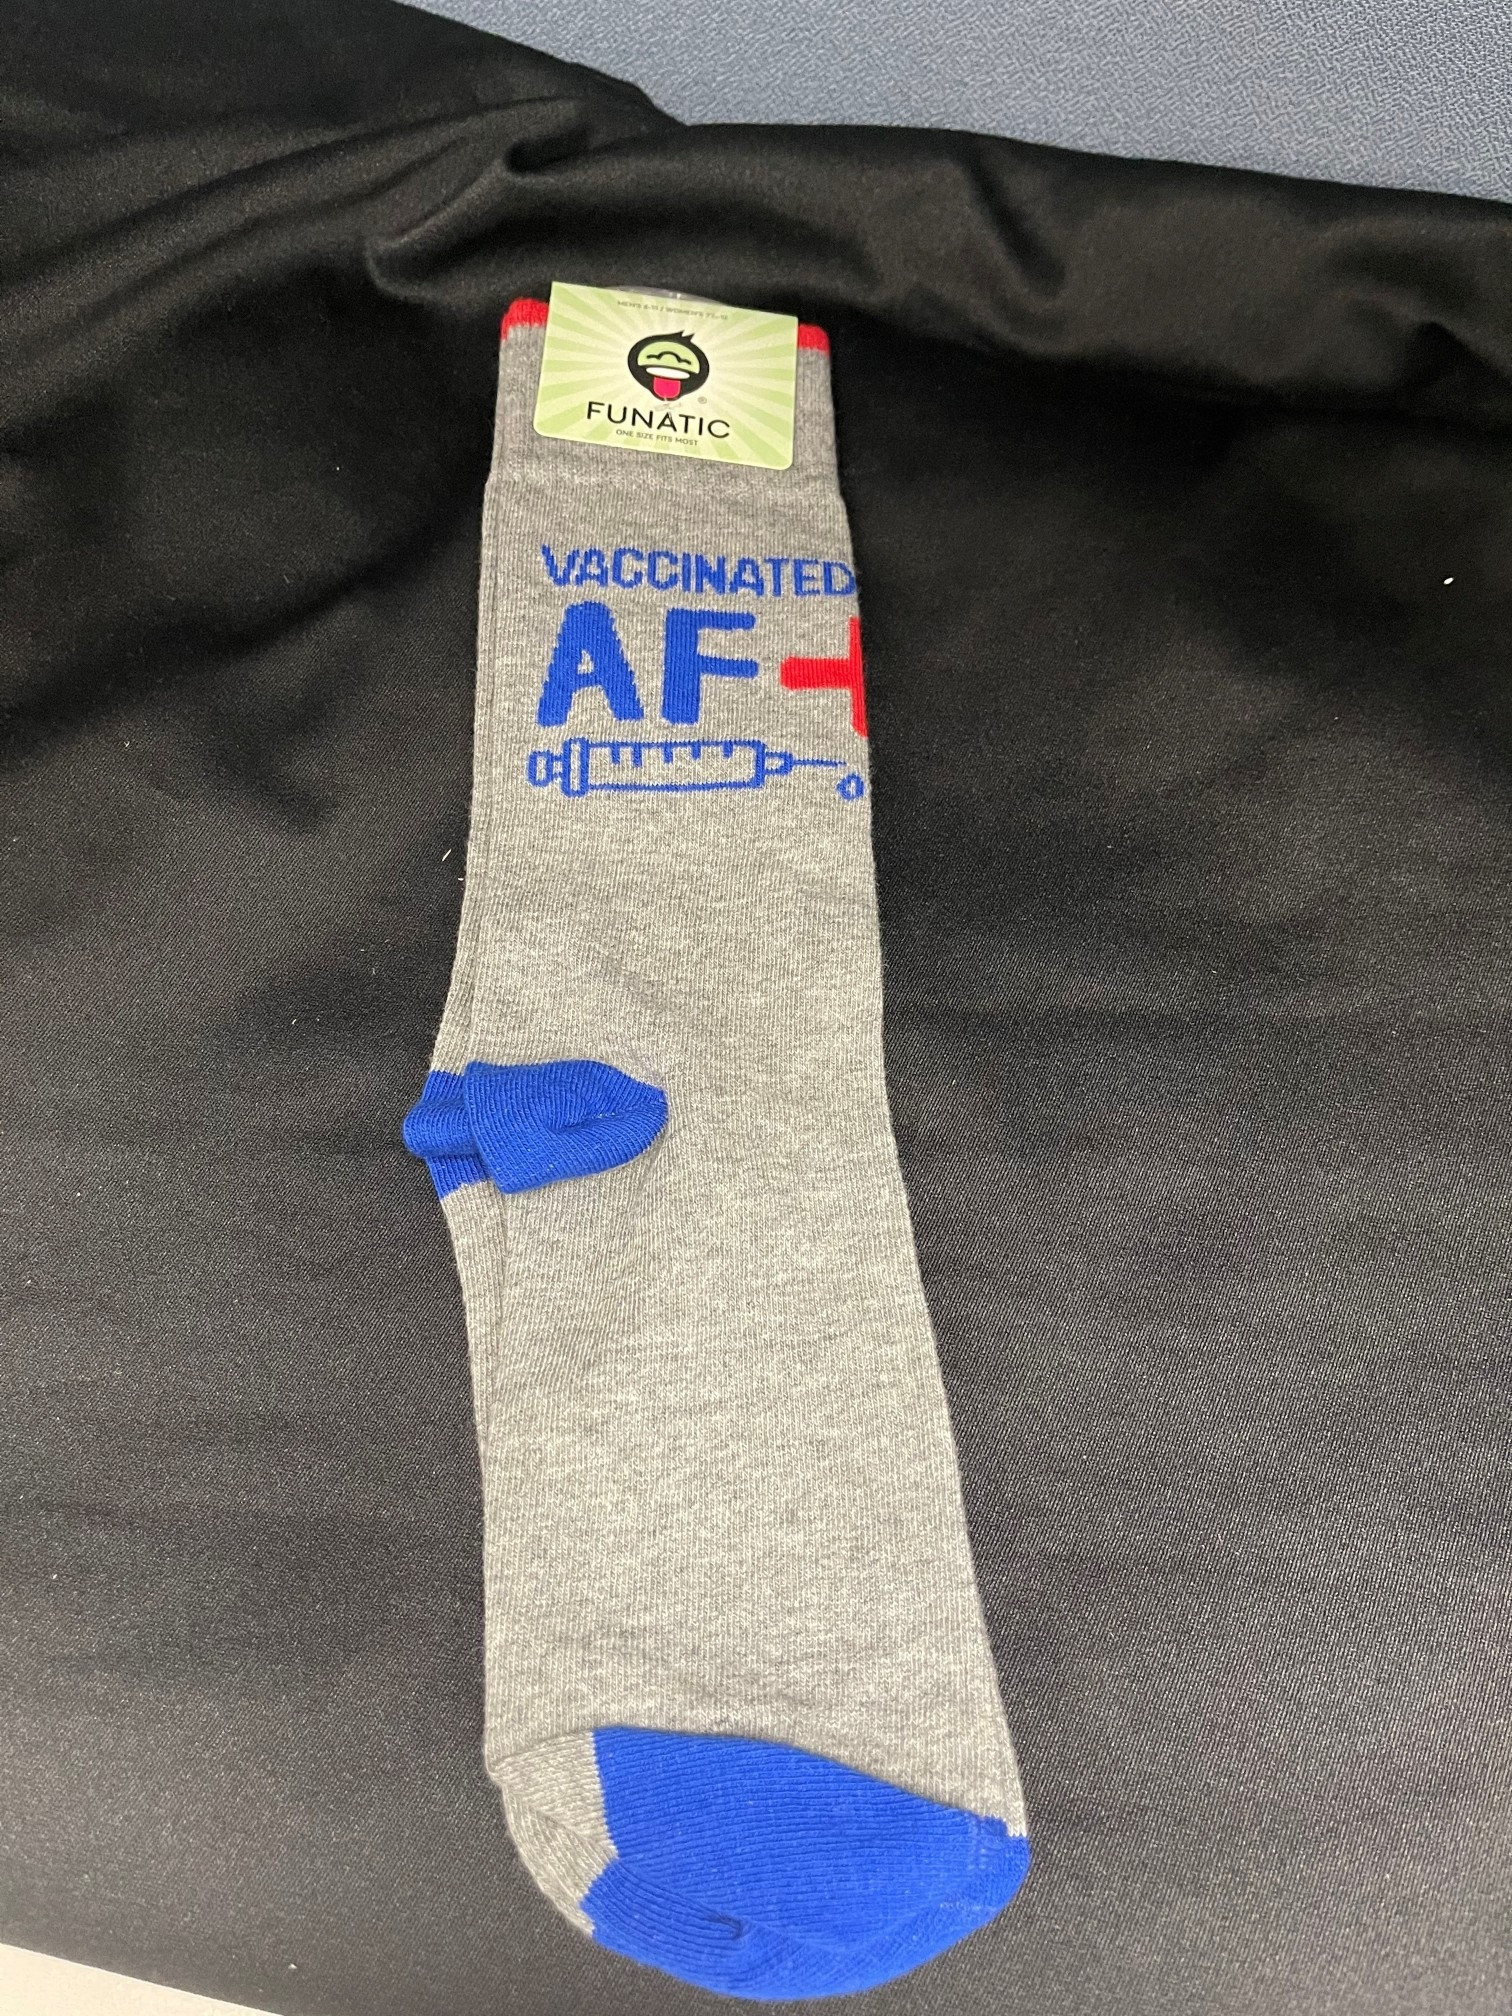 Funatic Socks - "Vaccinated AF" - Gray with red and blue trim - One Size Fits All